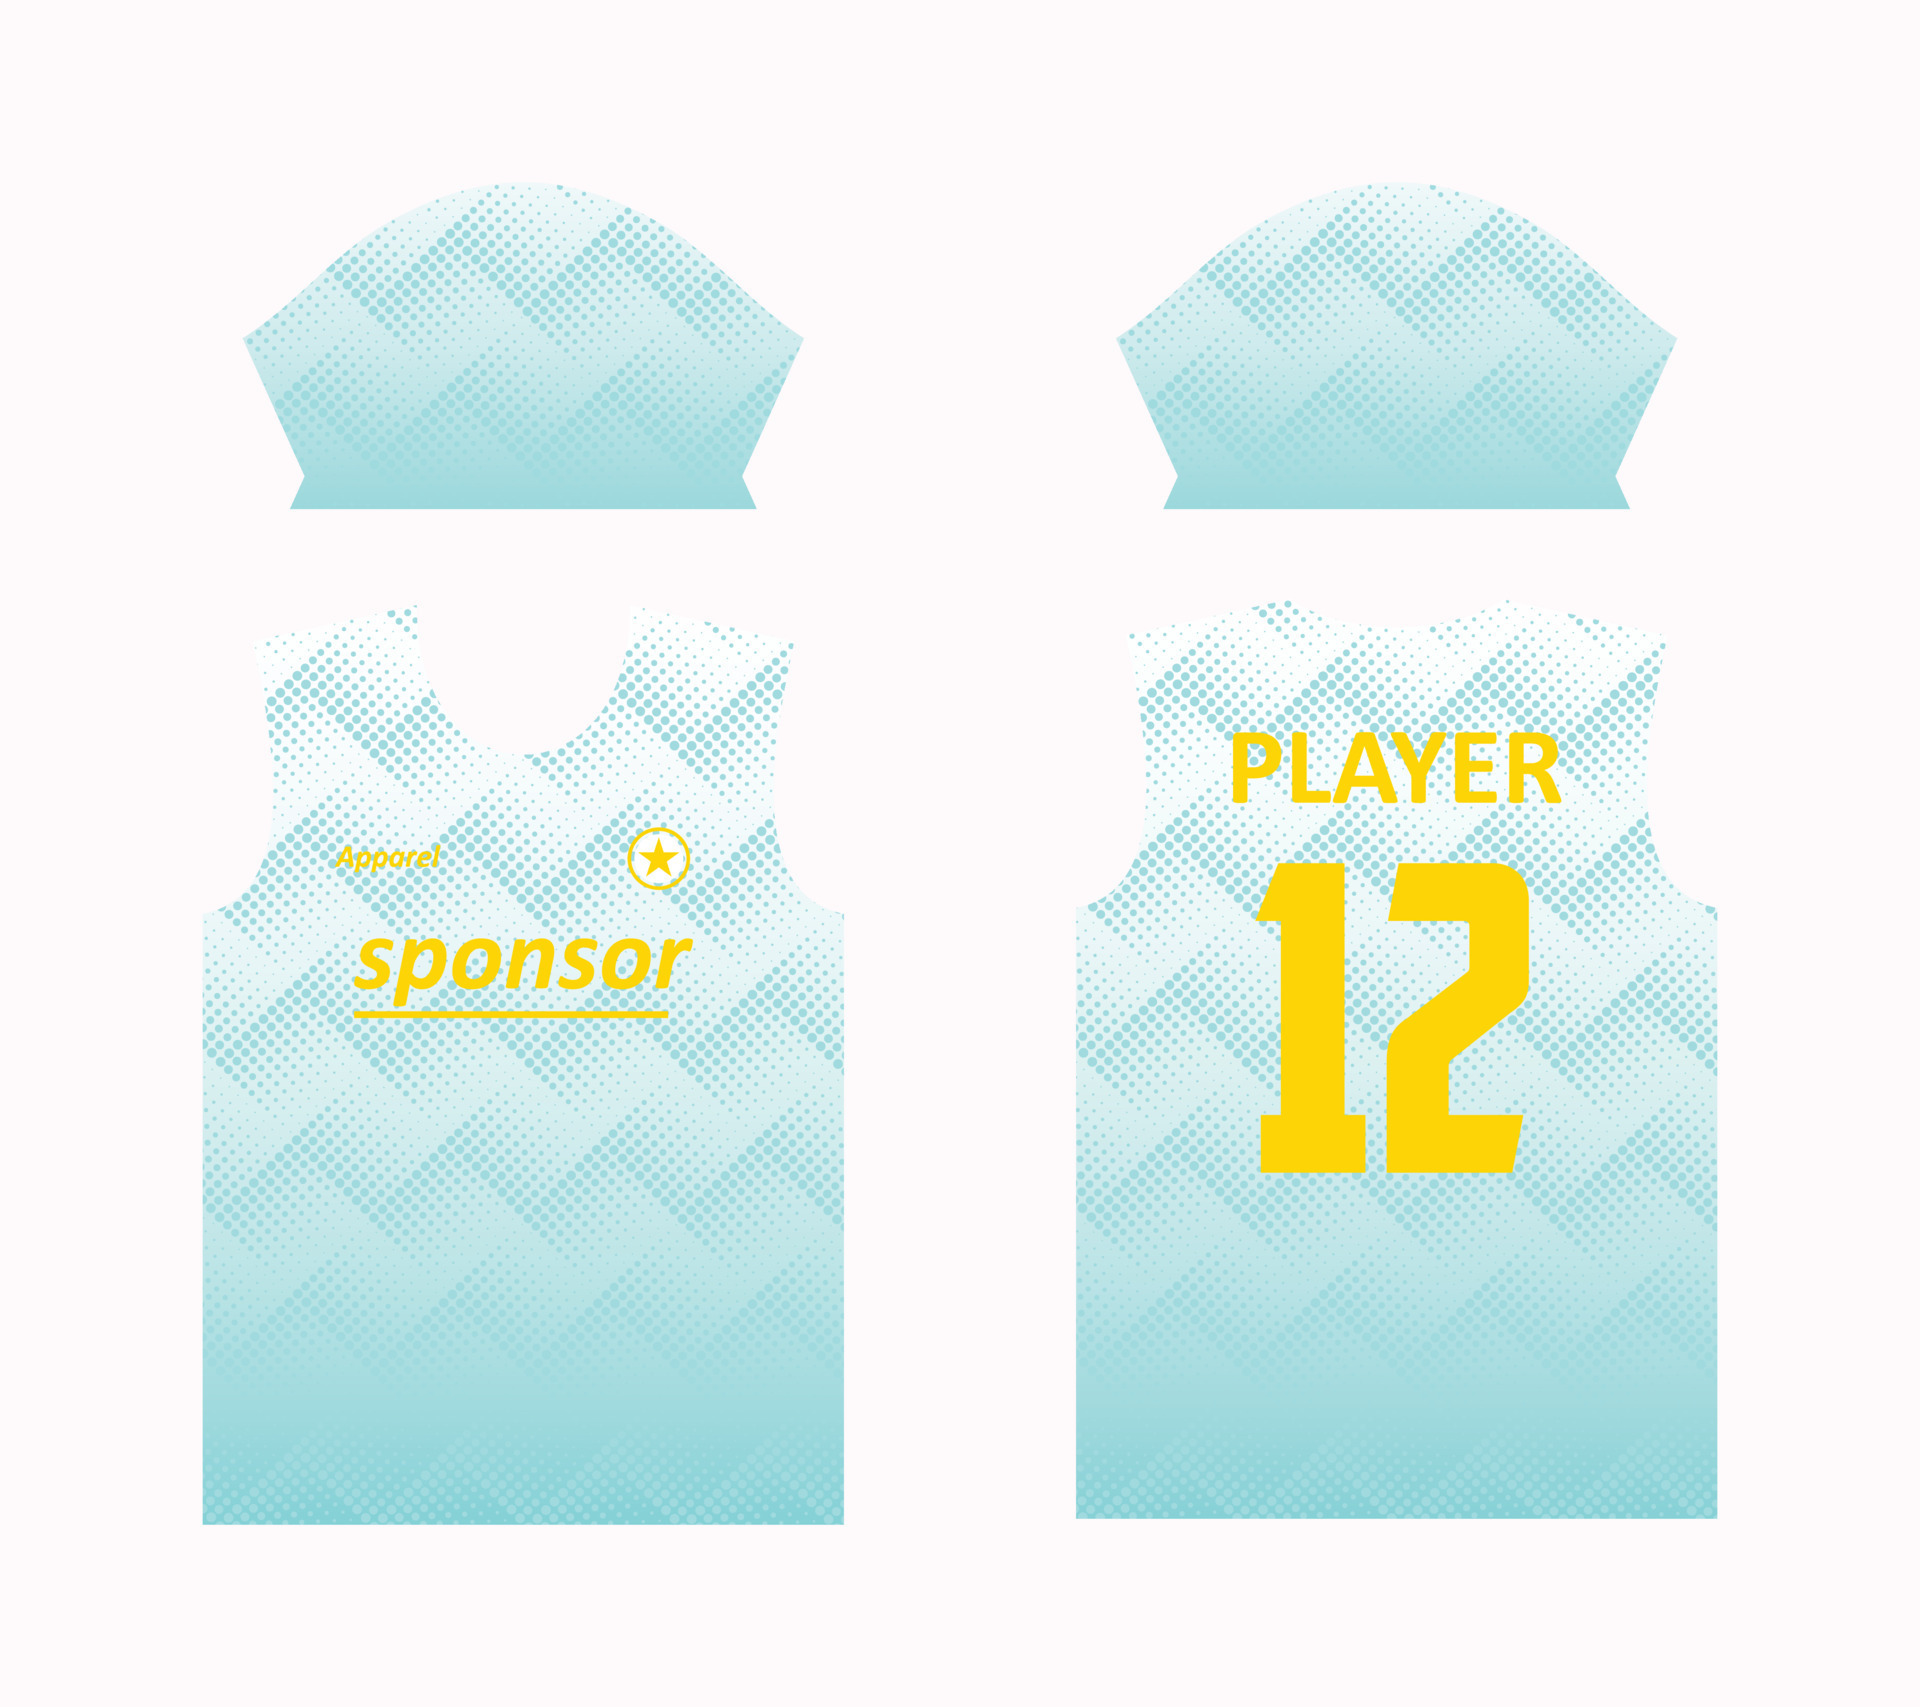 white sublimation jersey